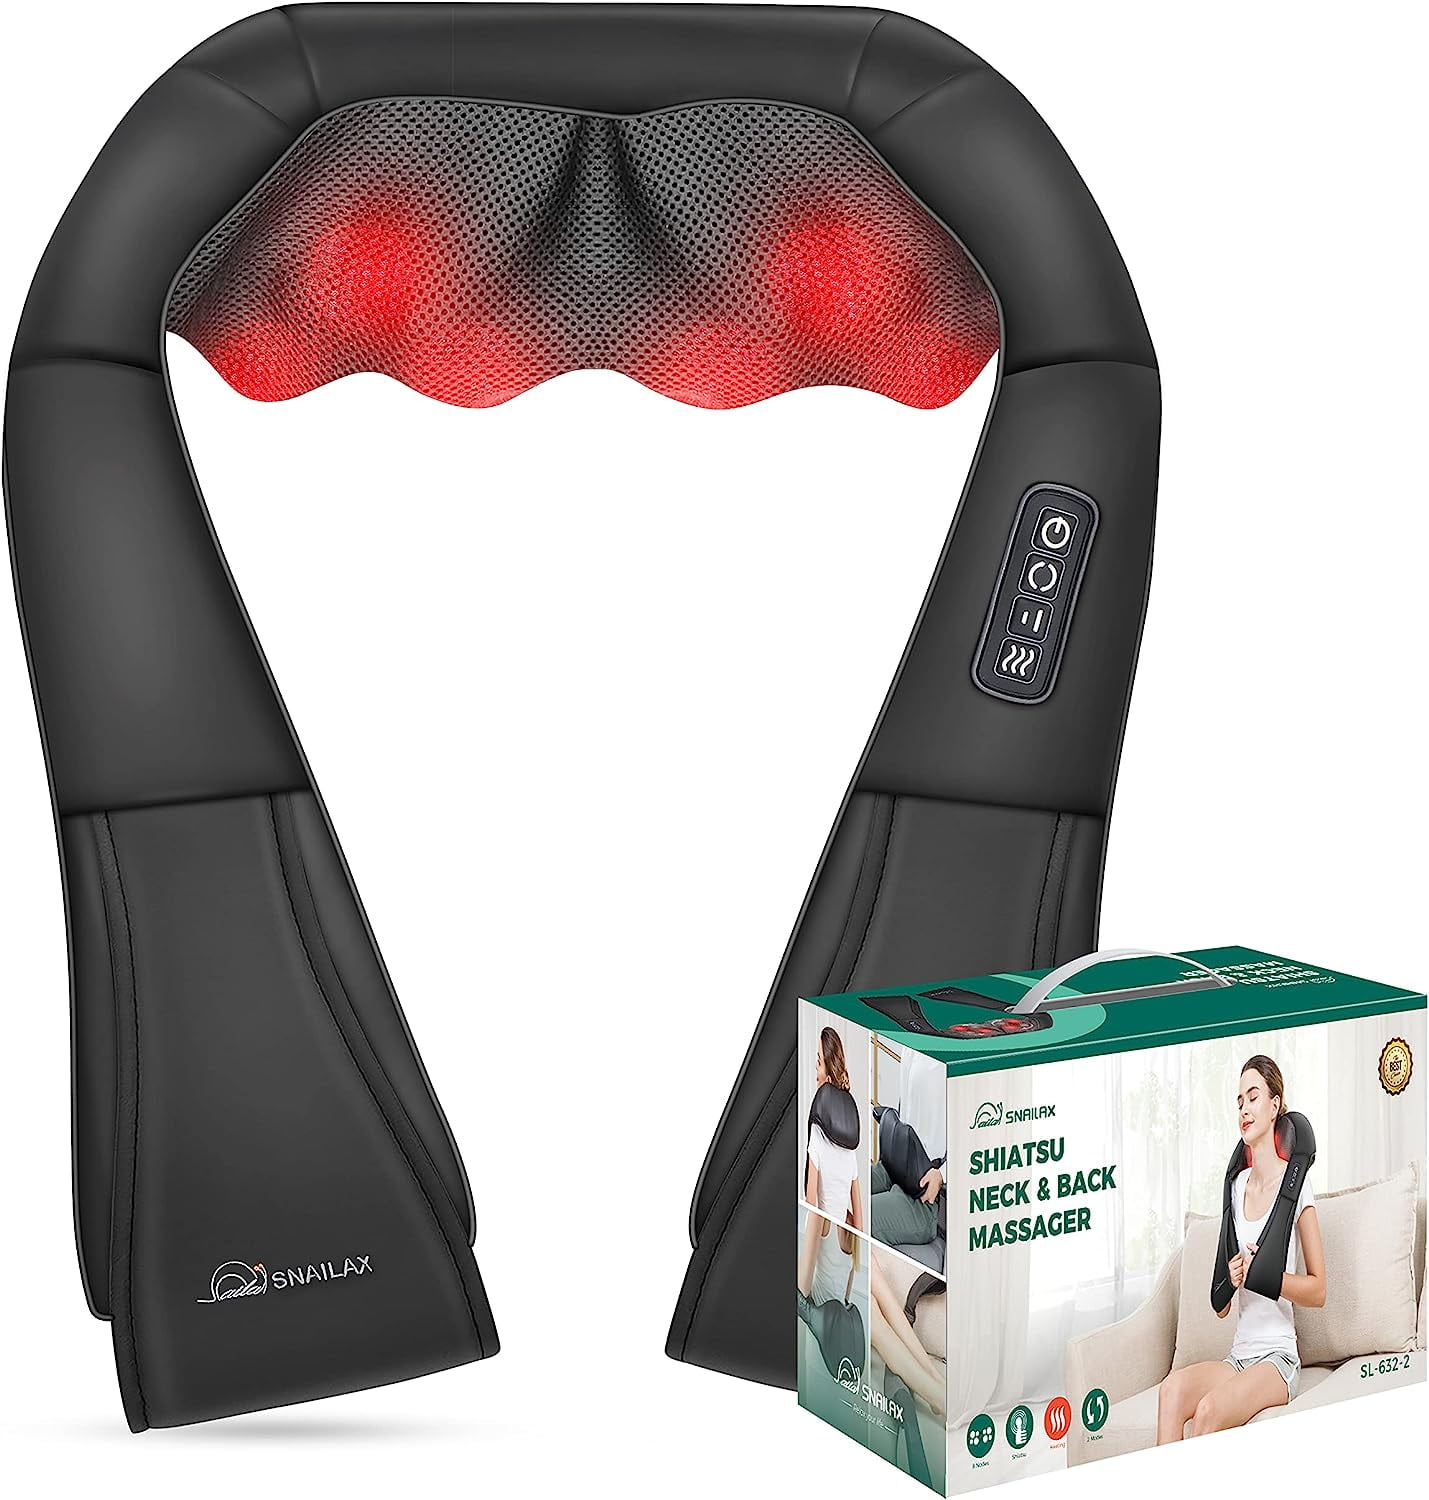 Snailax Shiatsu Neck and Shoulder Massager, Gifts for Men,Back Massager  with Heat, Deep Kneading Ele…See more Snailax Shiatsu Neck and Shoulder